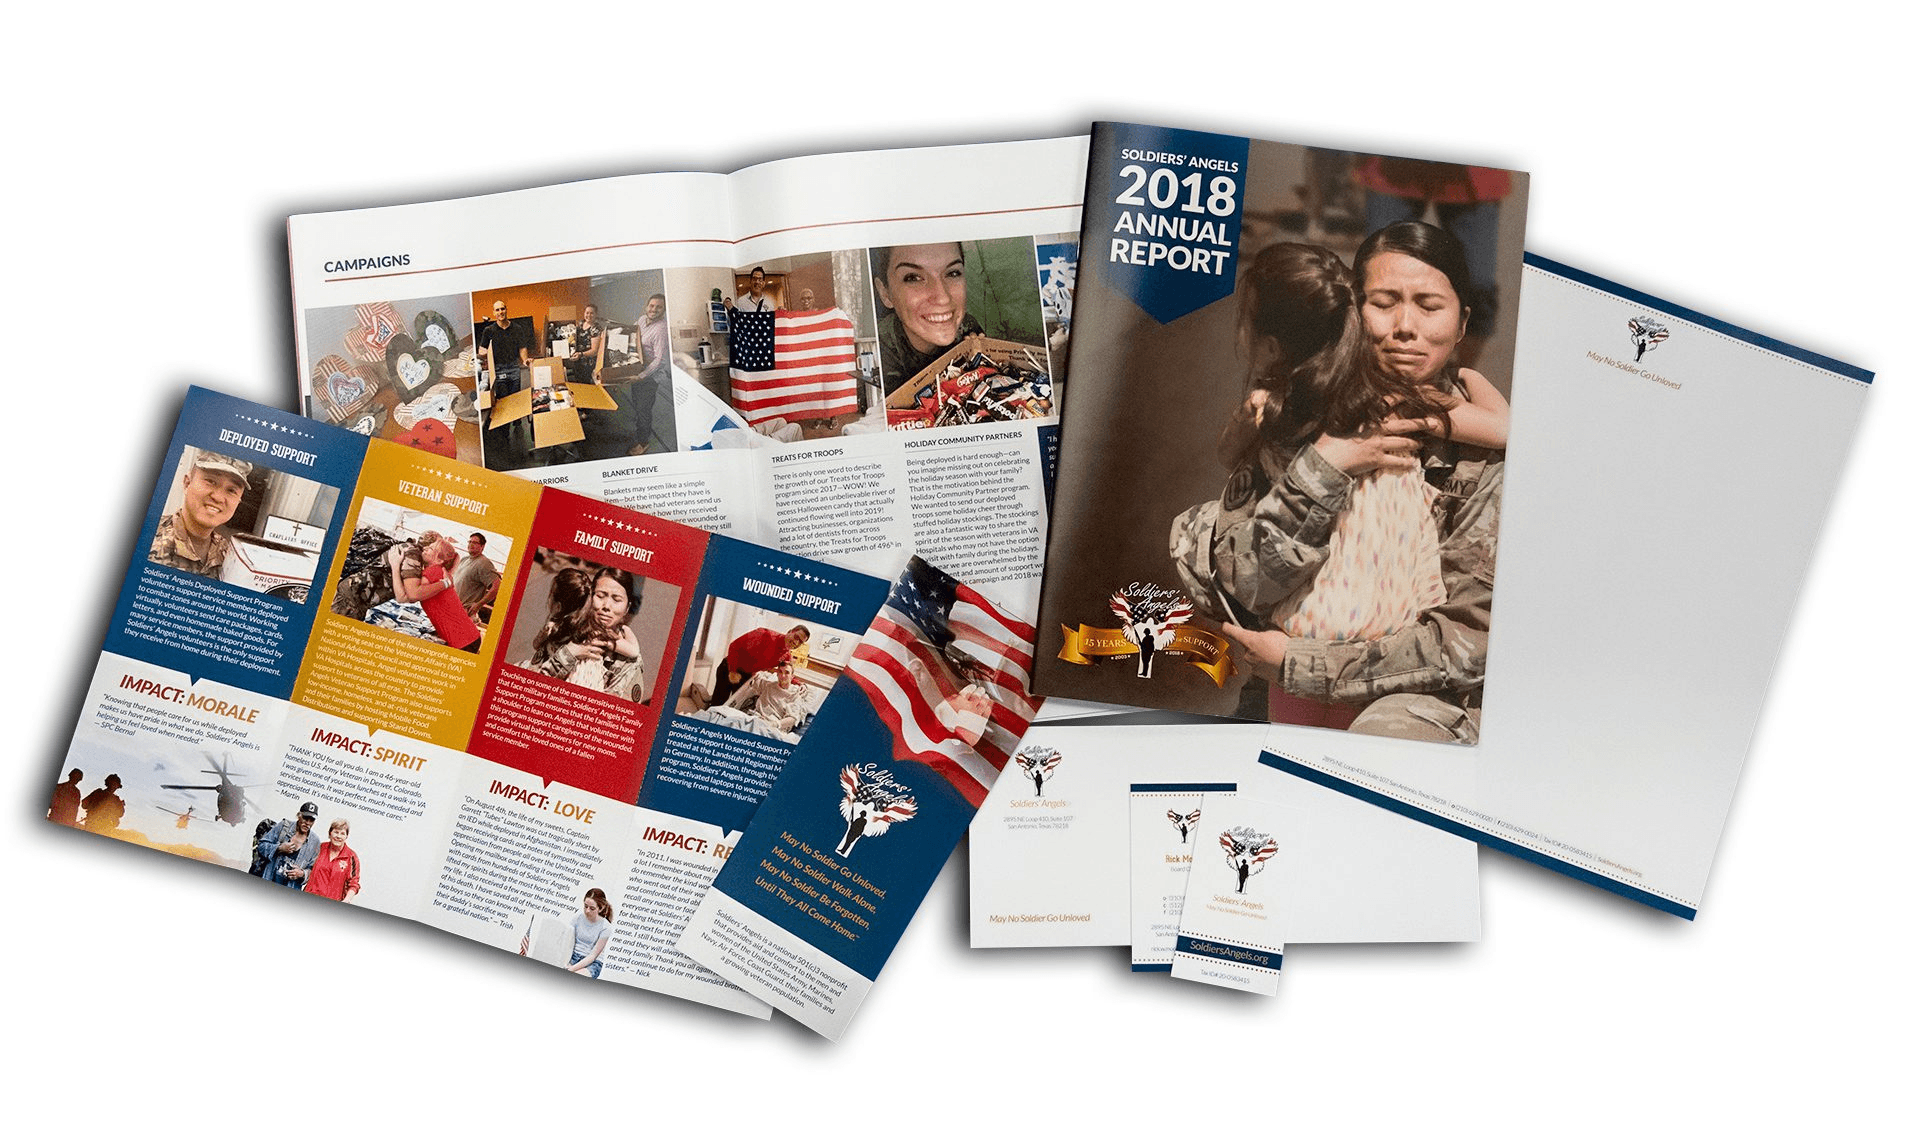 Soldiers’ Angels Annual Report